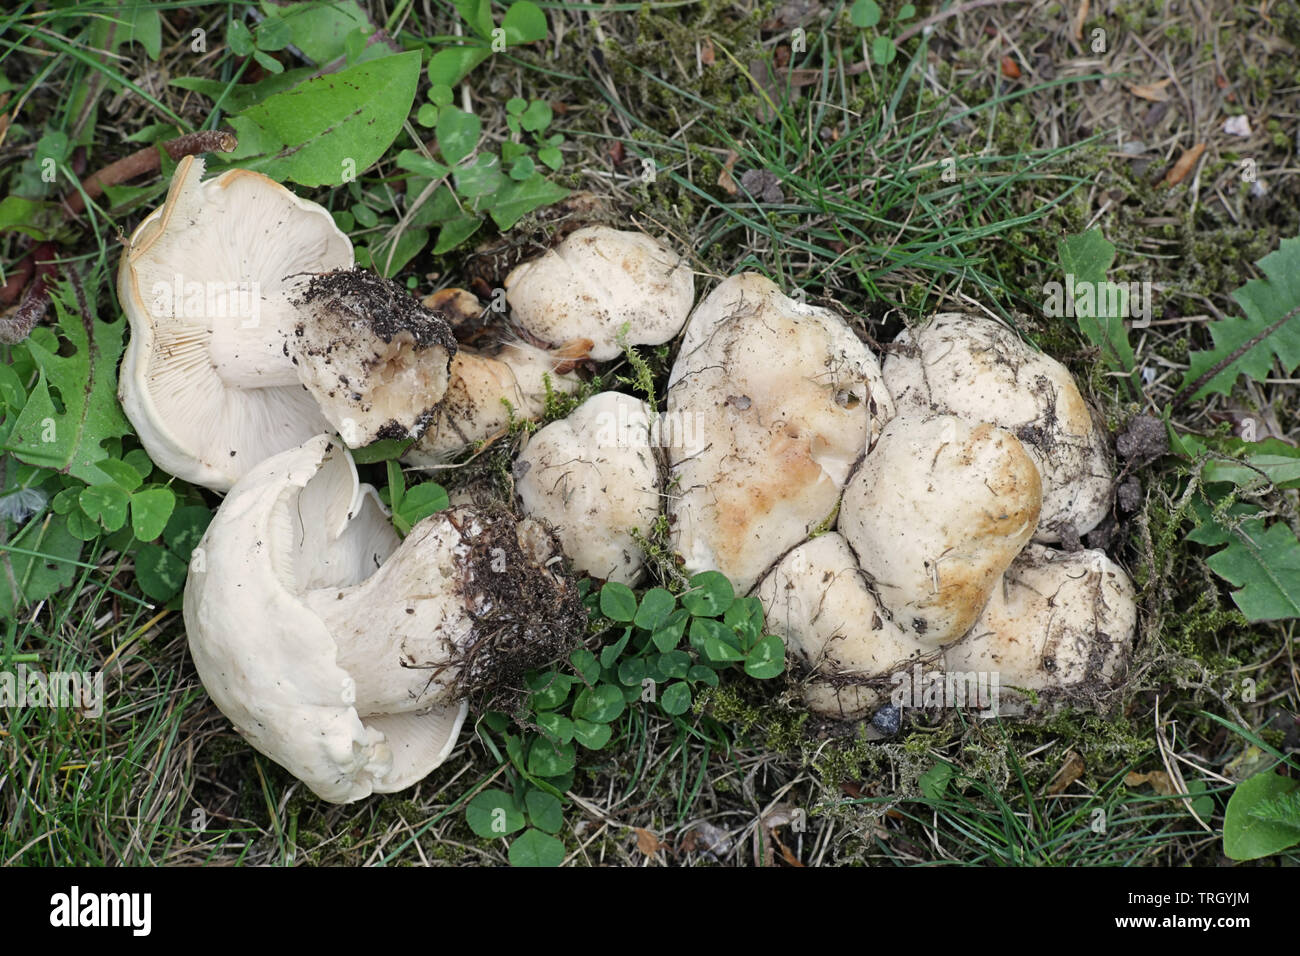 Calocybe gambosa, commonly known as St. George's mushroom, an edible wild mushroom from Finland Stock Photo